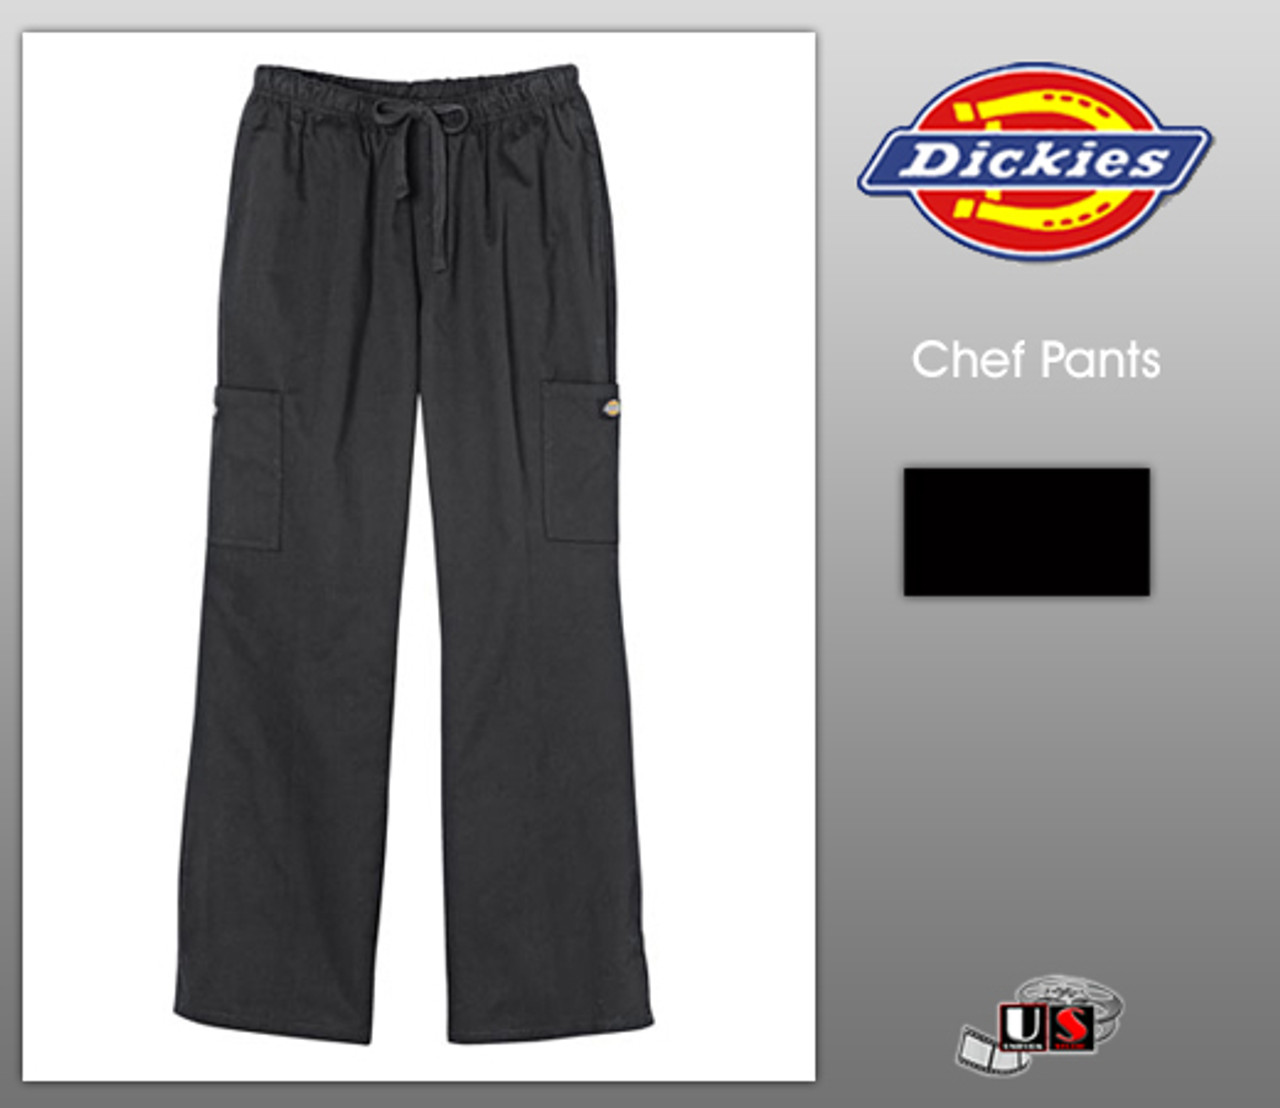 Dickies Chef Pants Size Chart